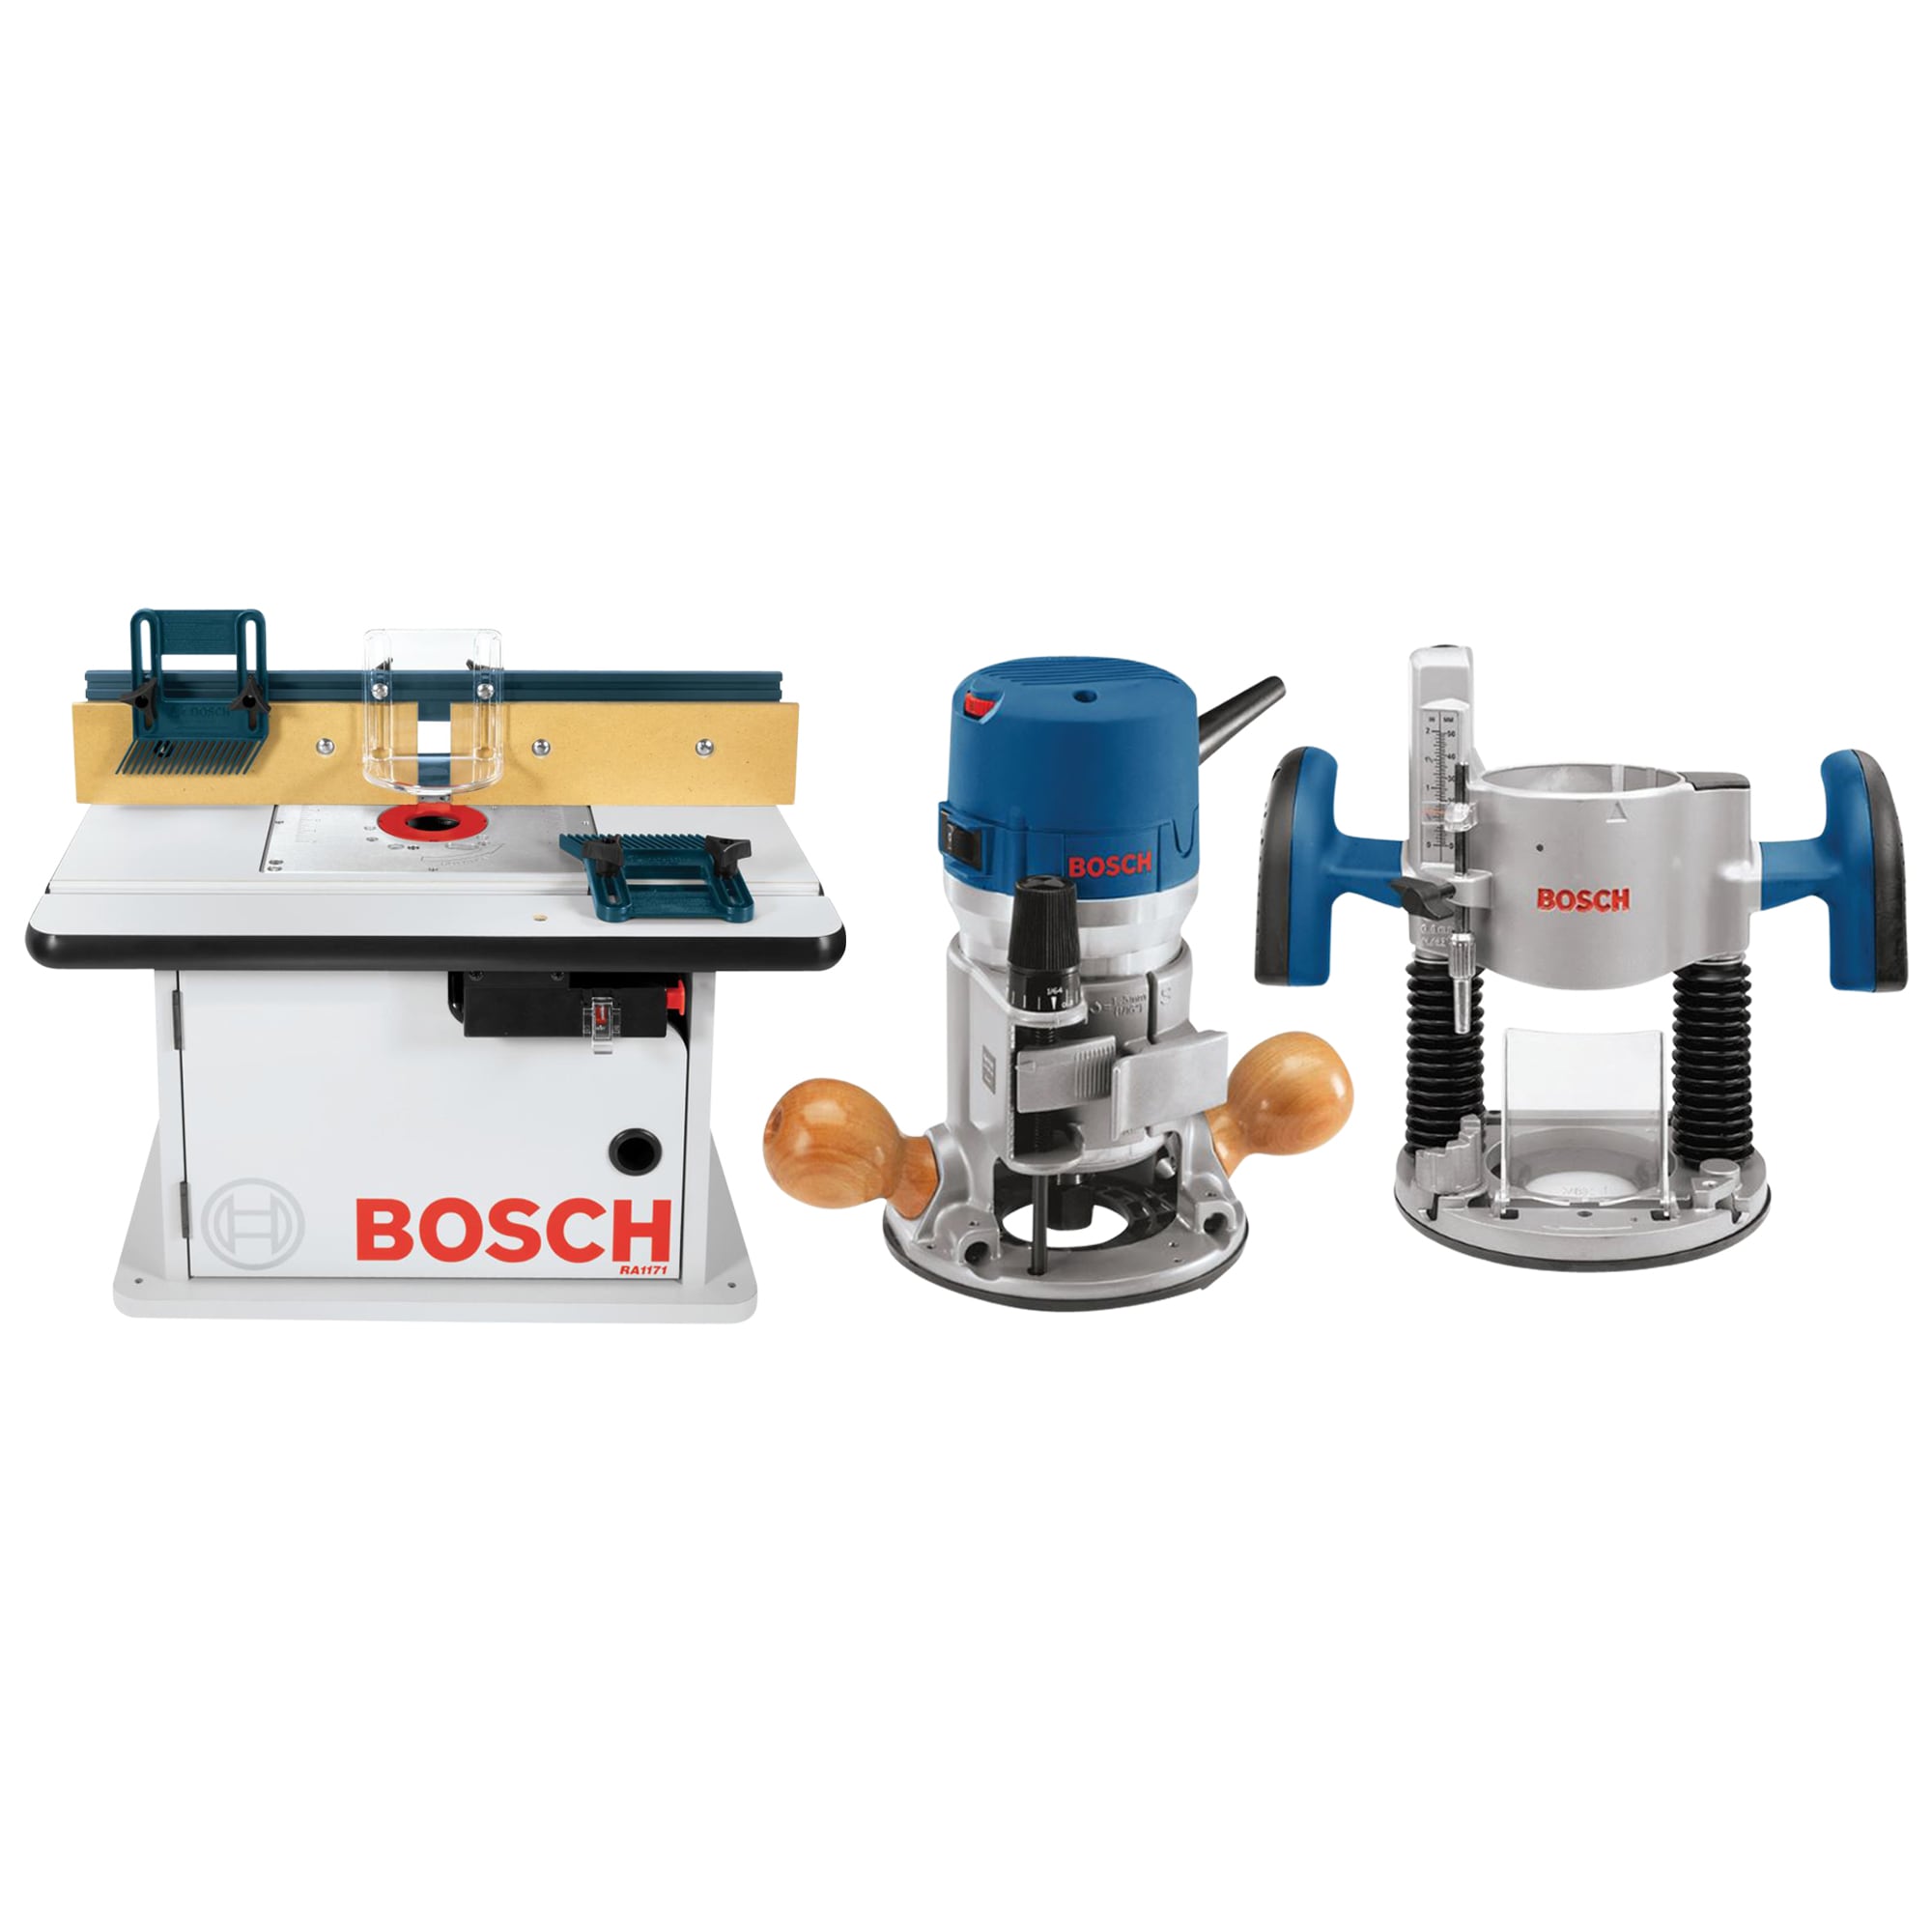 Shop Bosch Bosch Plunge & Fixed-Base Router Combo Kit w/ Cabinet Style  Router Table at